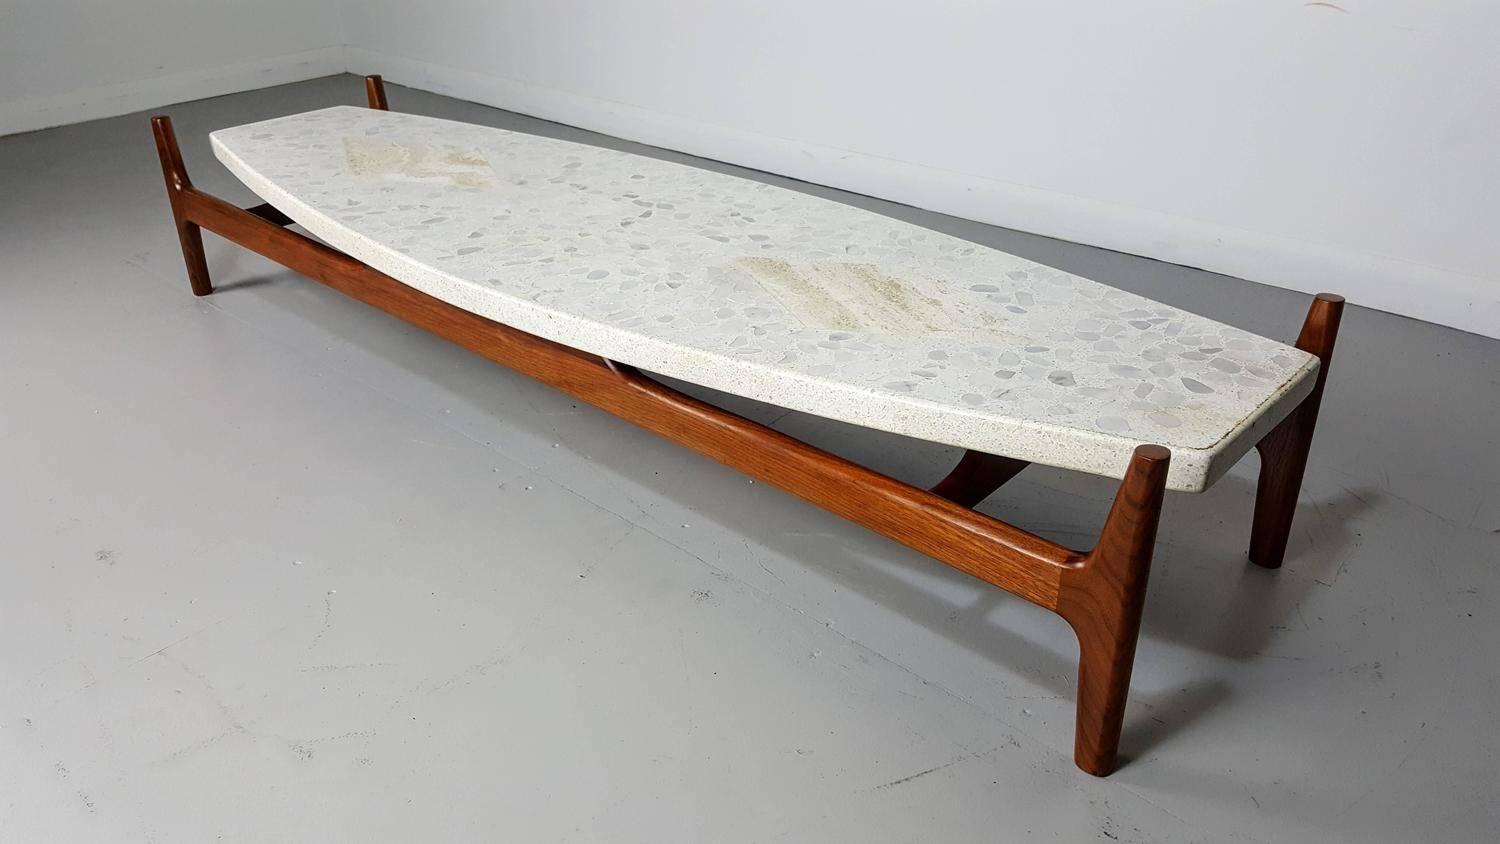 Low sculptural walnut coffee table with inlaid terrazzo top by Harvey Probber, circa 1960. Fully restored.